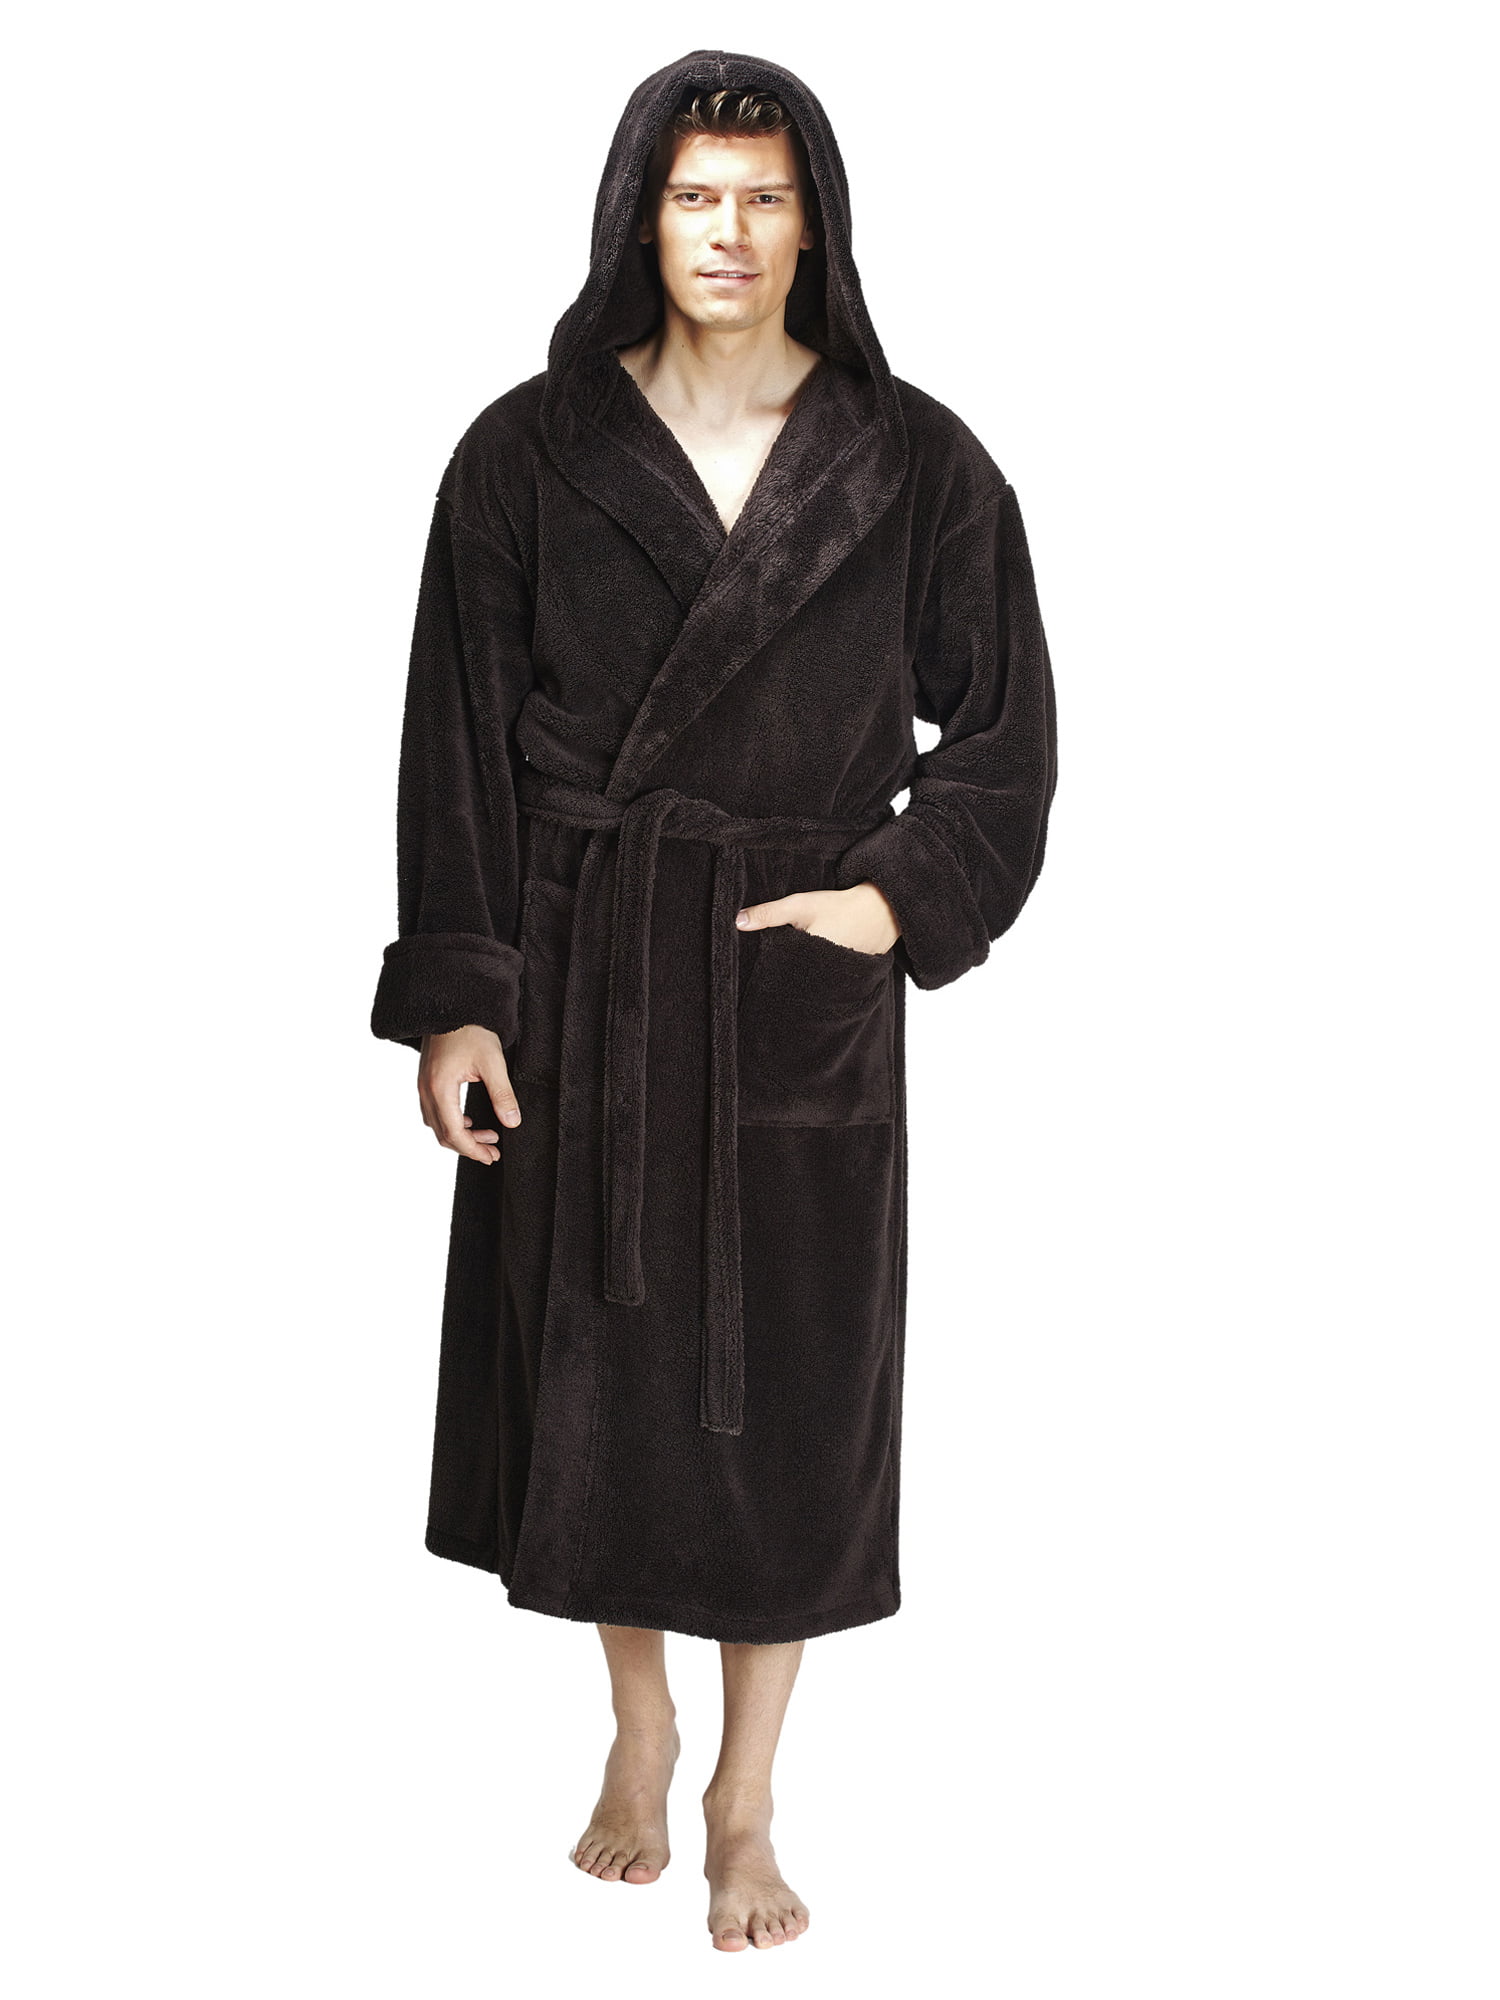 Harbor Bay DXL Big and Tall Hooded Terry Robe